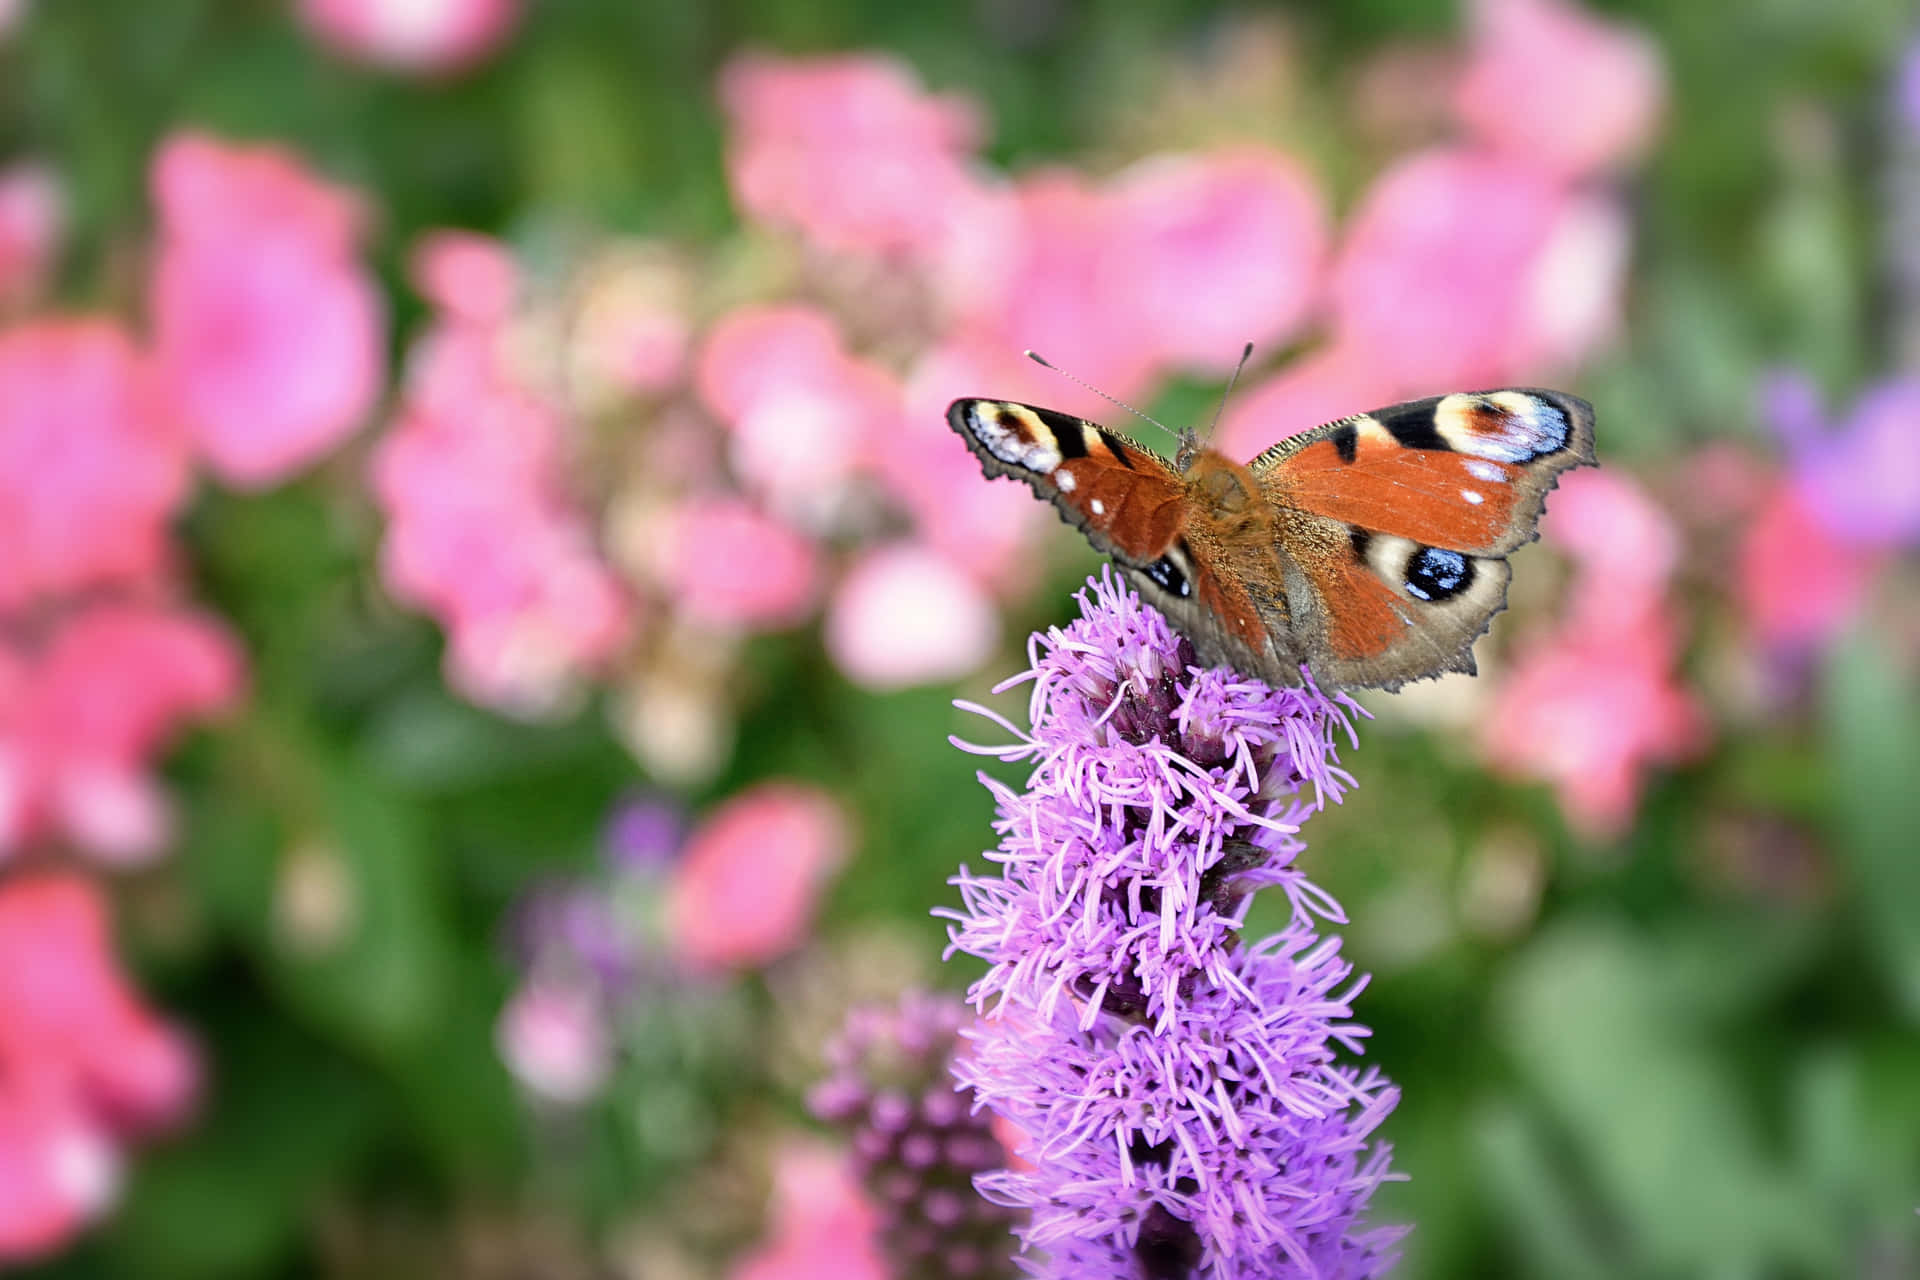 Plant your own butterfly garden paradise! Wallpaper